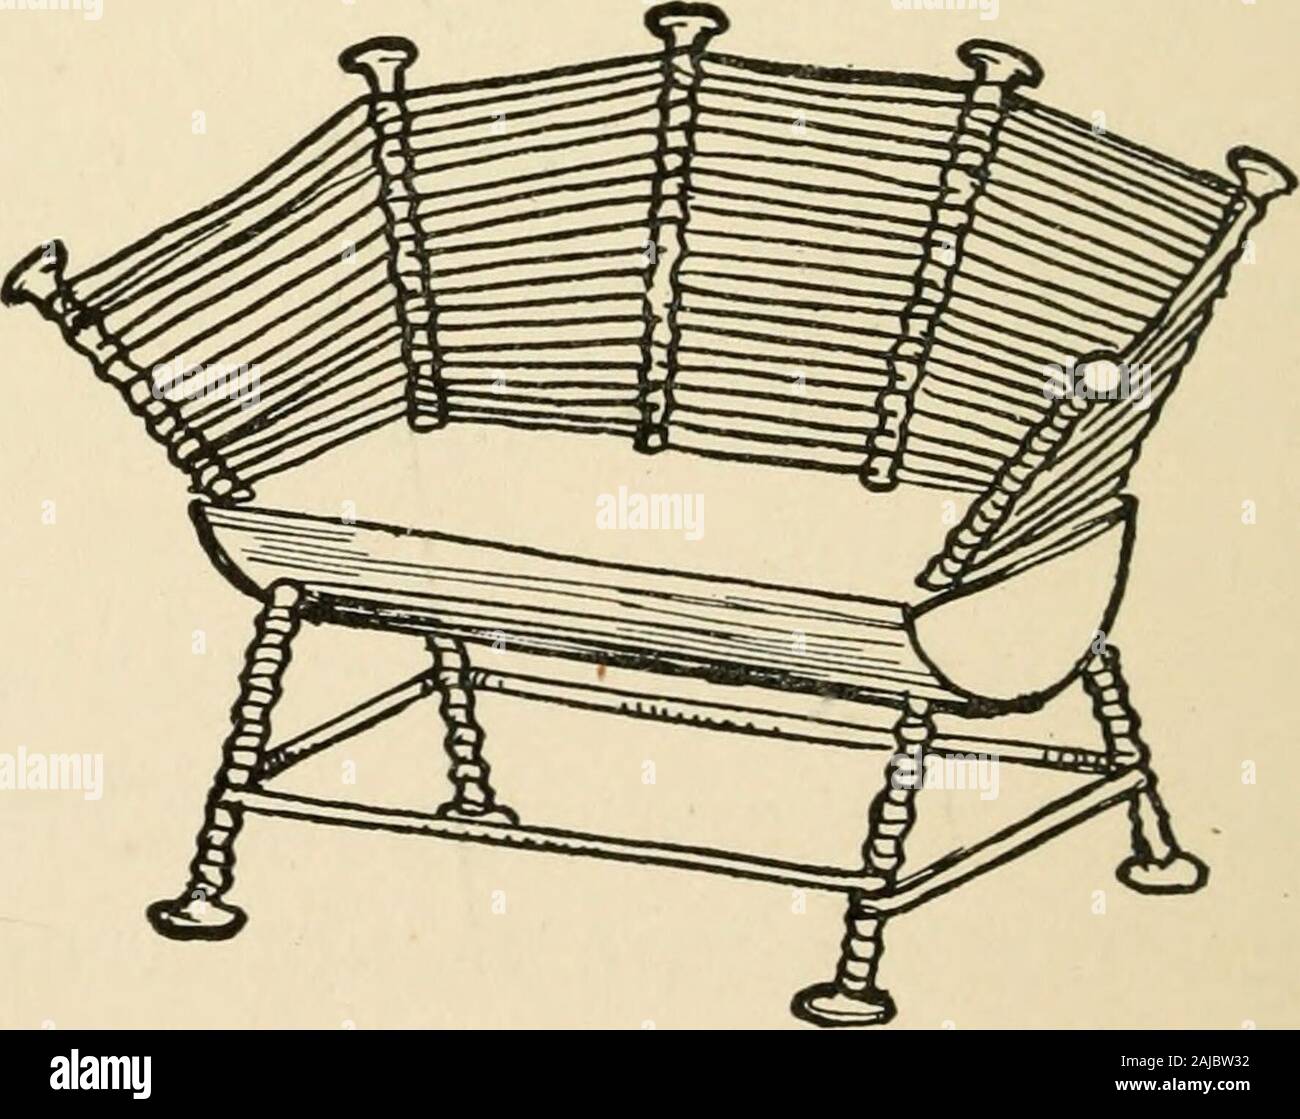 The boy craftsman; practical ad profitable ideas for a boy's leisure hours . Chair, such as shown in Fig. 403, find a flat cork,and stick four pins in one side for legs, and five pins fairly close together in the otherside for the chair-back (see illustra-tion). When the pins have beenproperly placed, take some worstedand wind it around each of thefour legs, crossing from one toanother as shown in the drawing,thus forming the chair-rounds.Also weave the worsted in and outaround the pins forming the chair-FiG. 403.-Chair. ^^^y. ^g -j^ ^Yie drawing, so that all but the heads of the pins are cove Stock Photo